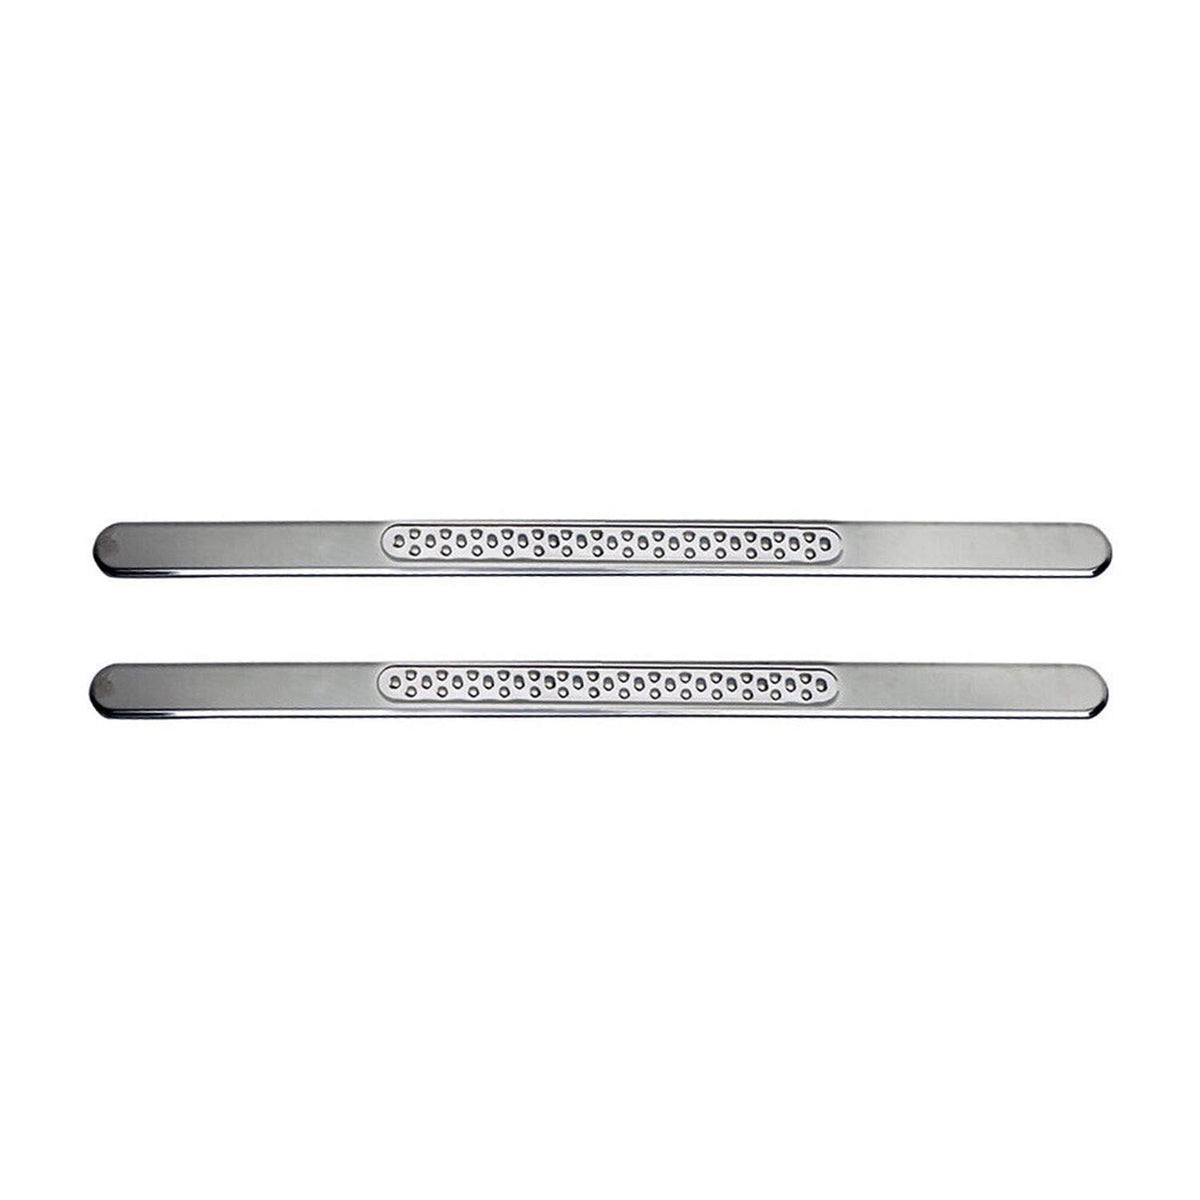 Stainless steel door sills for Alfa Romeo Mito 2008-2018 chrome 2x